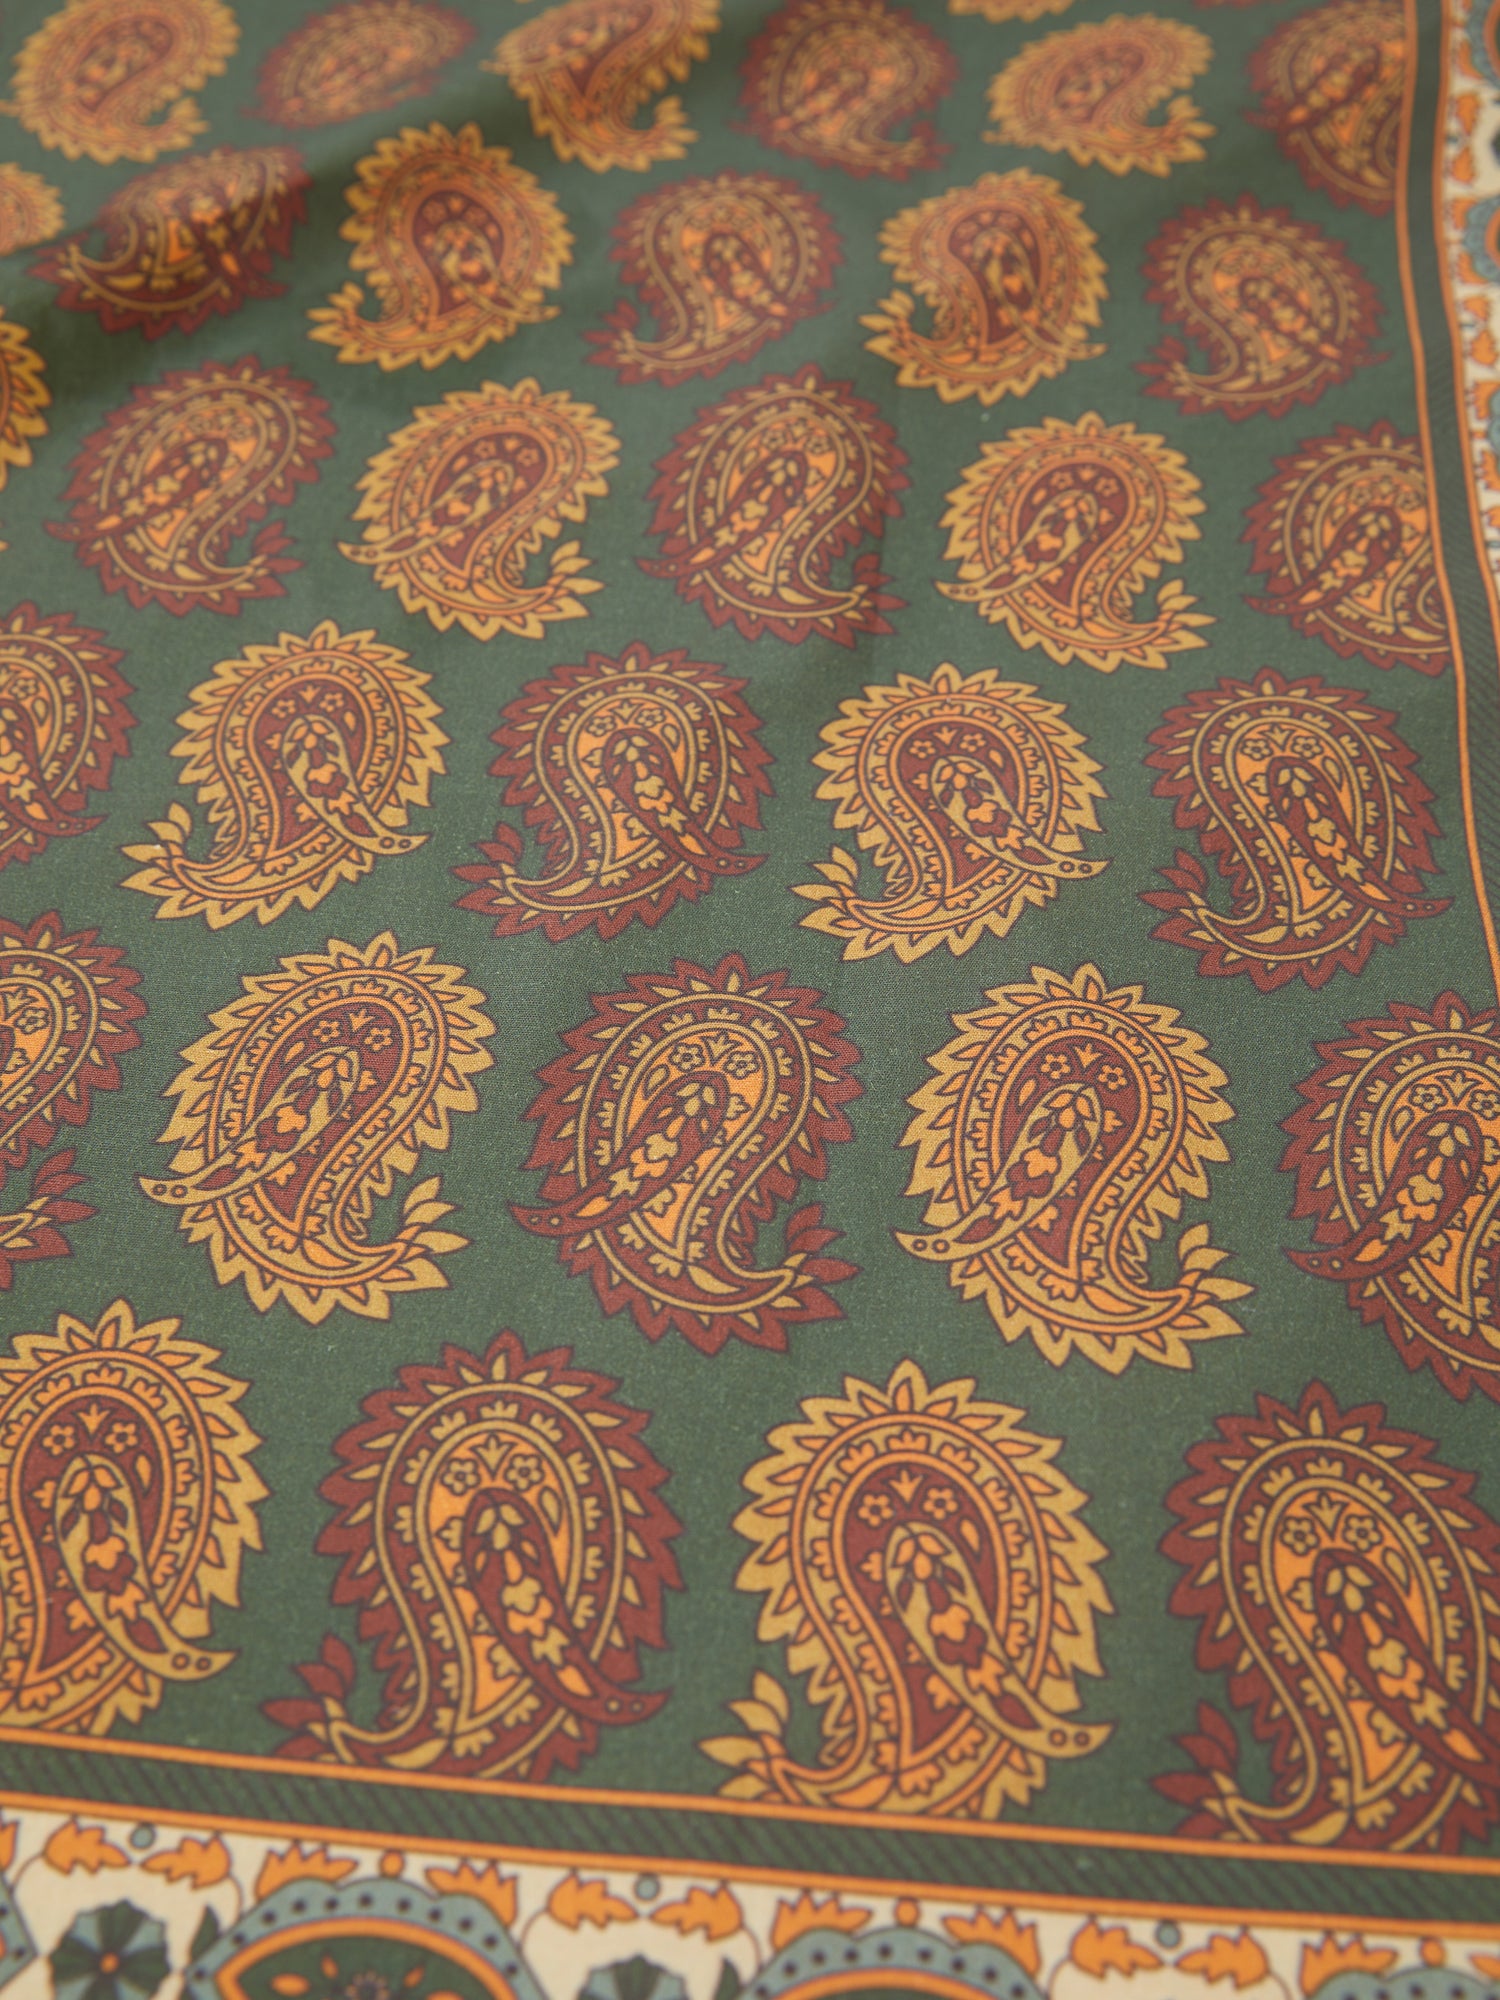 A Paisley Forest Bandana by Found in a cotton blend fabric with green and orange colors.